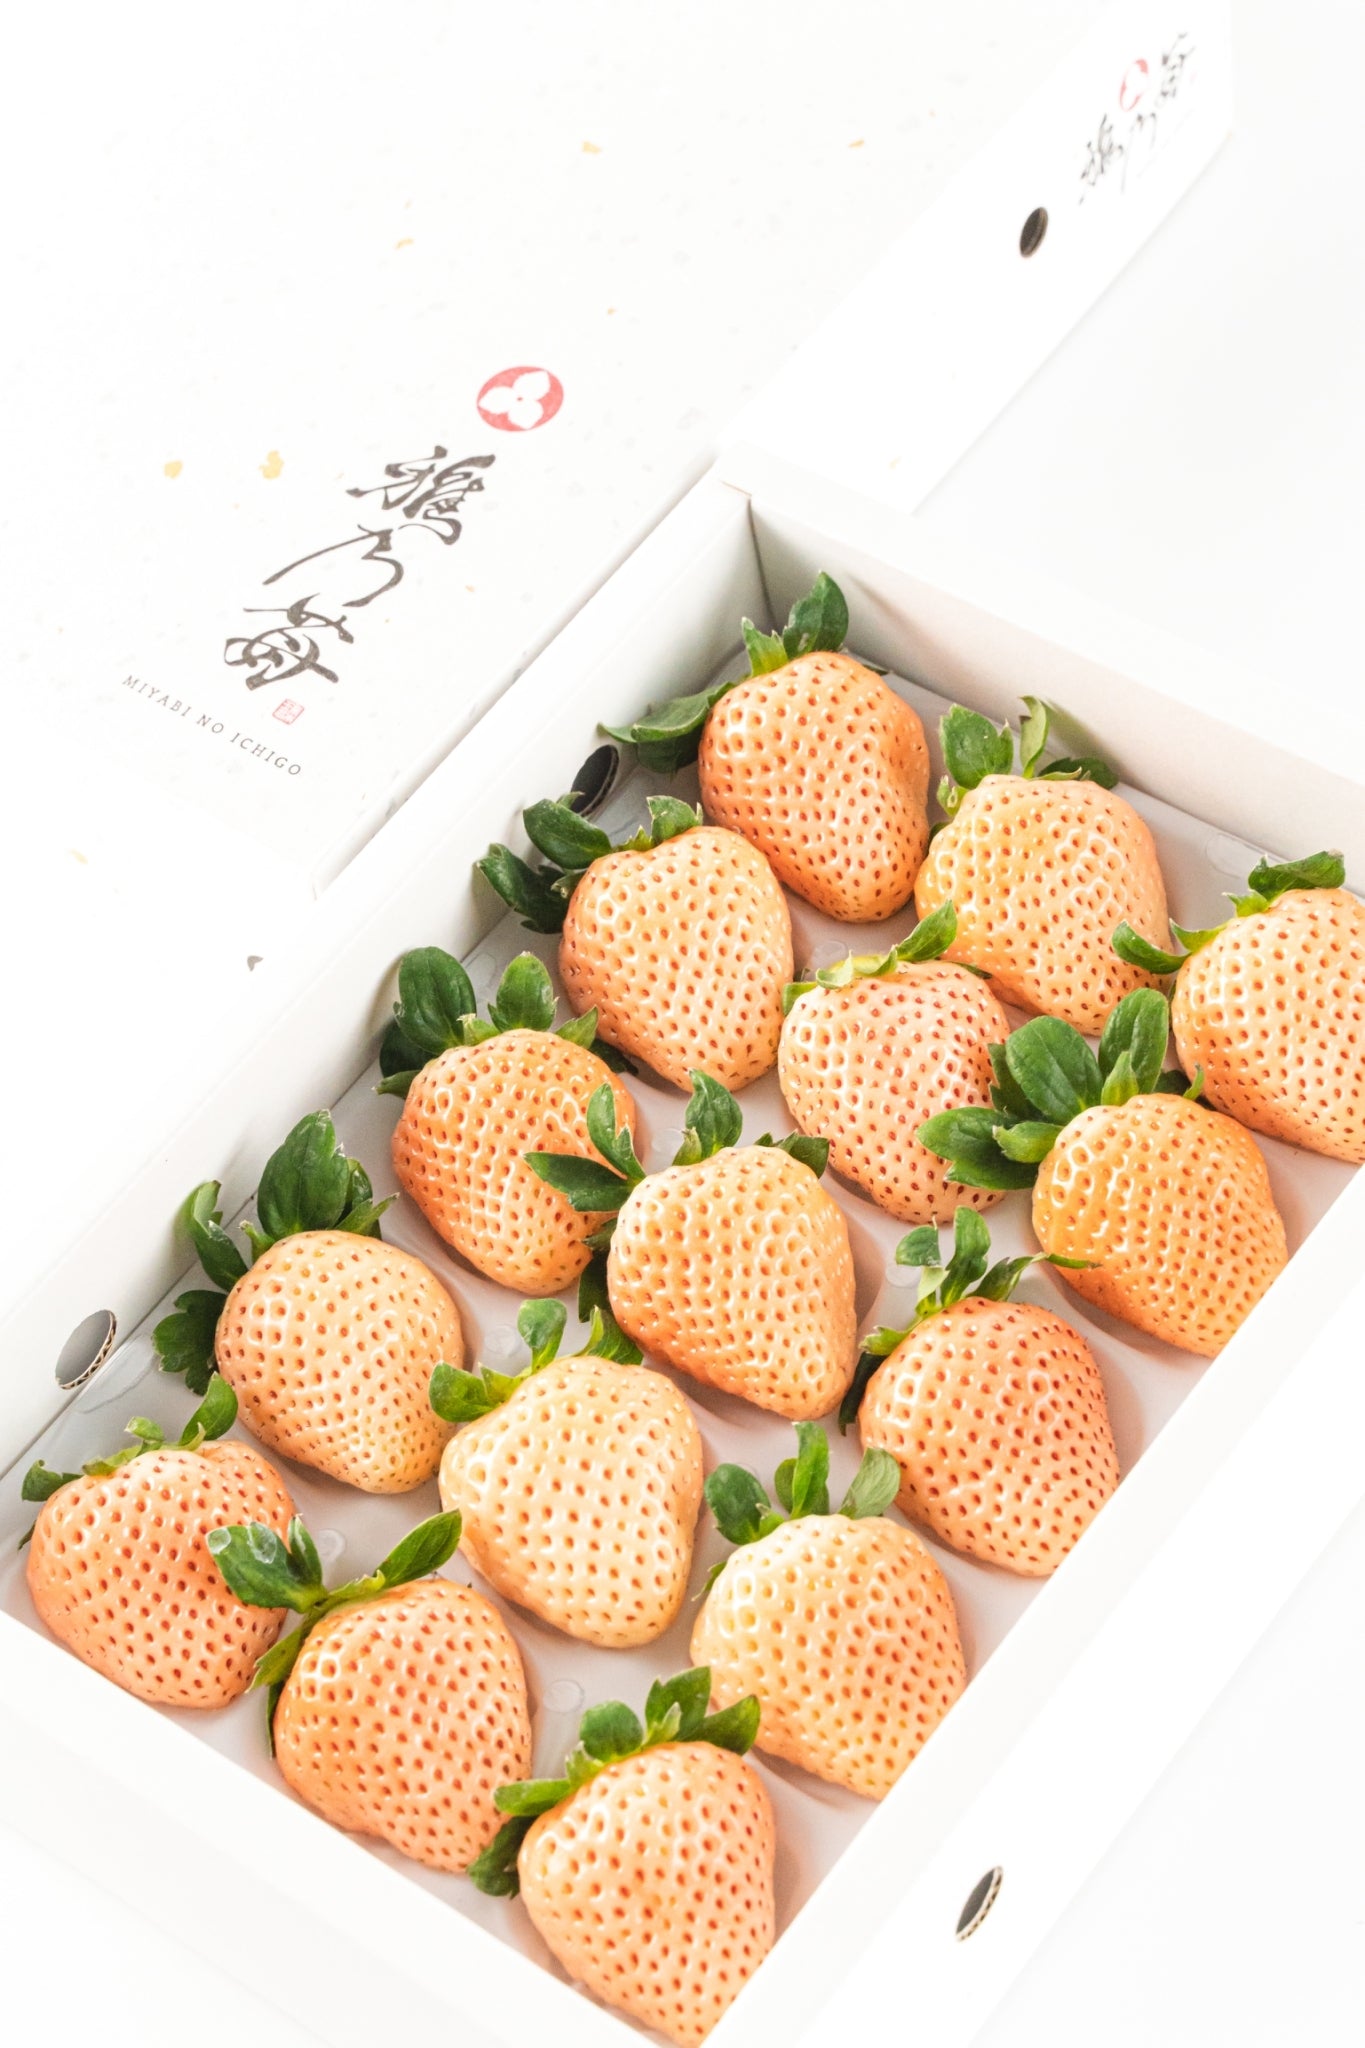 White Japanese Strawberry "Awa Yuki" 淡雪 400g with GIFT Pack  - limited availability